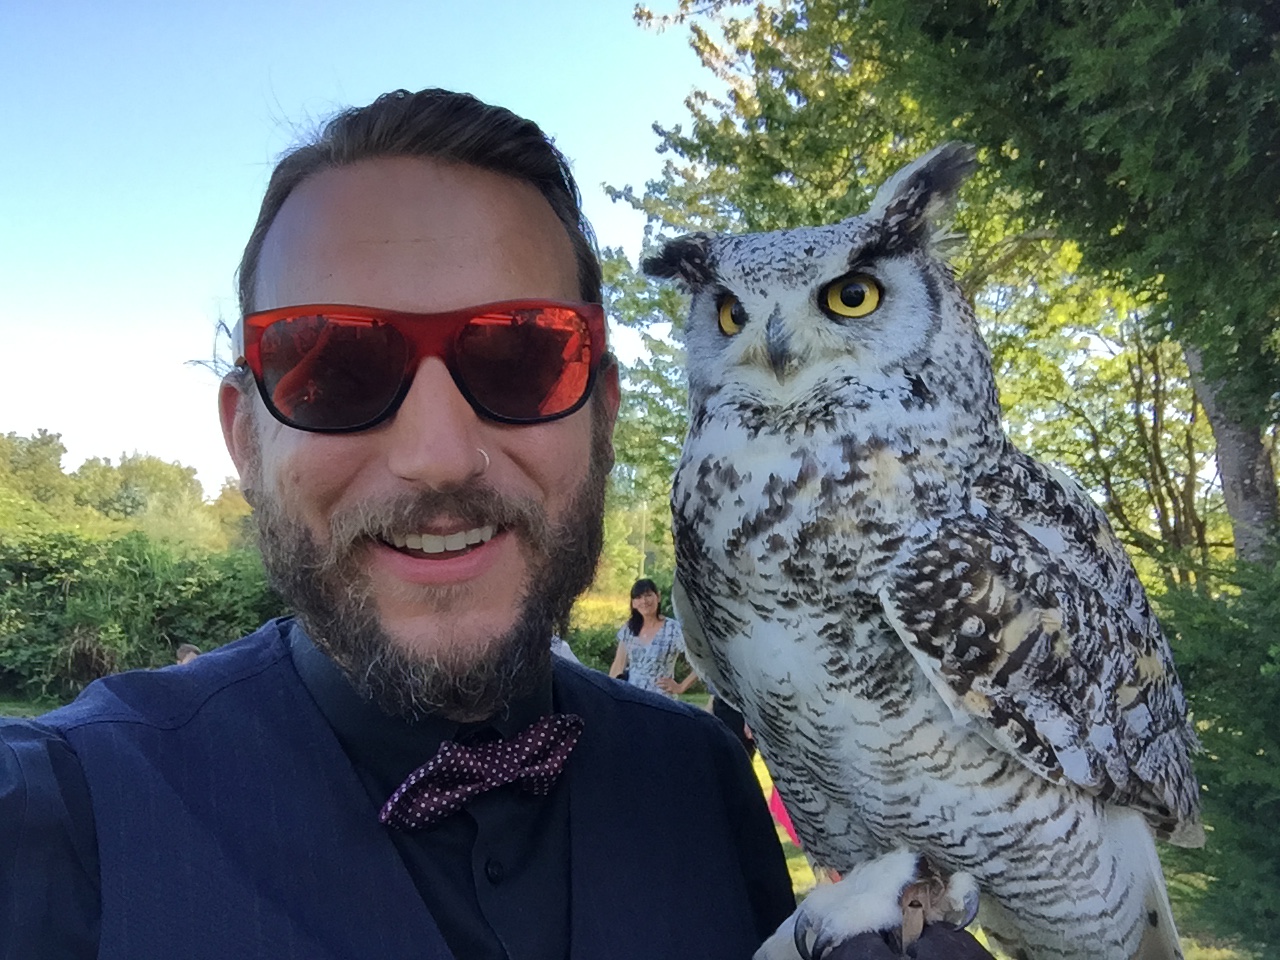 geeky nerd wedding with hagrid the owl